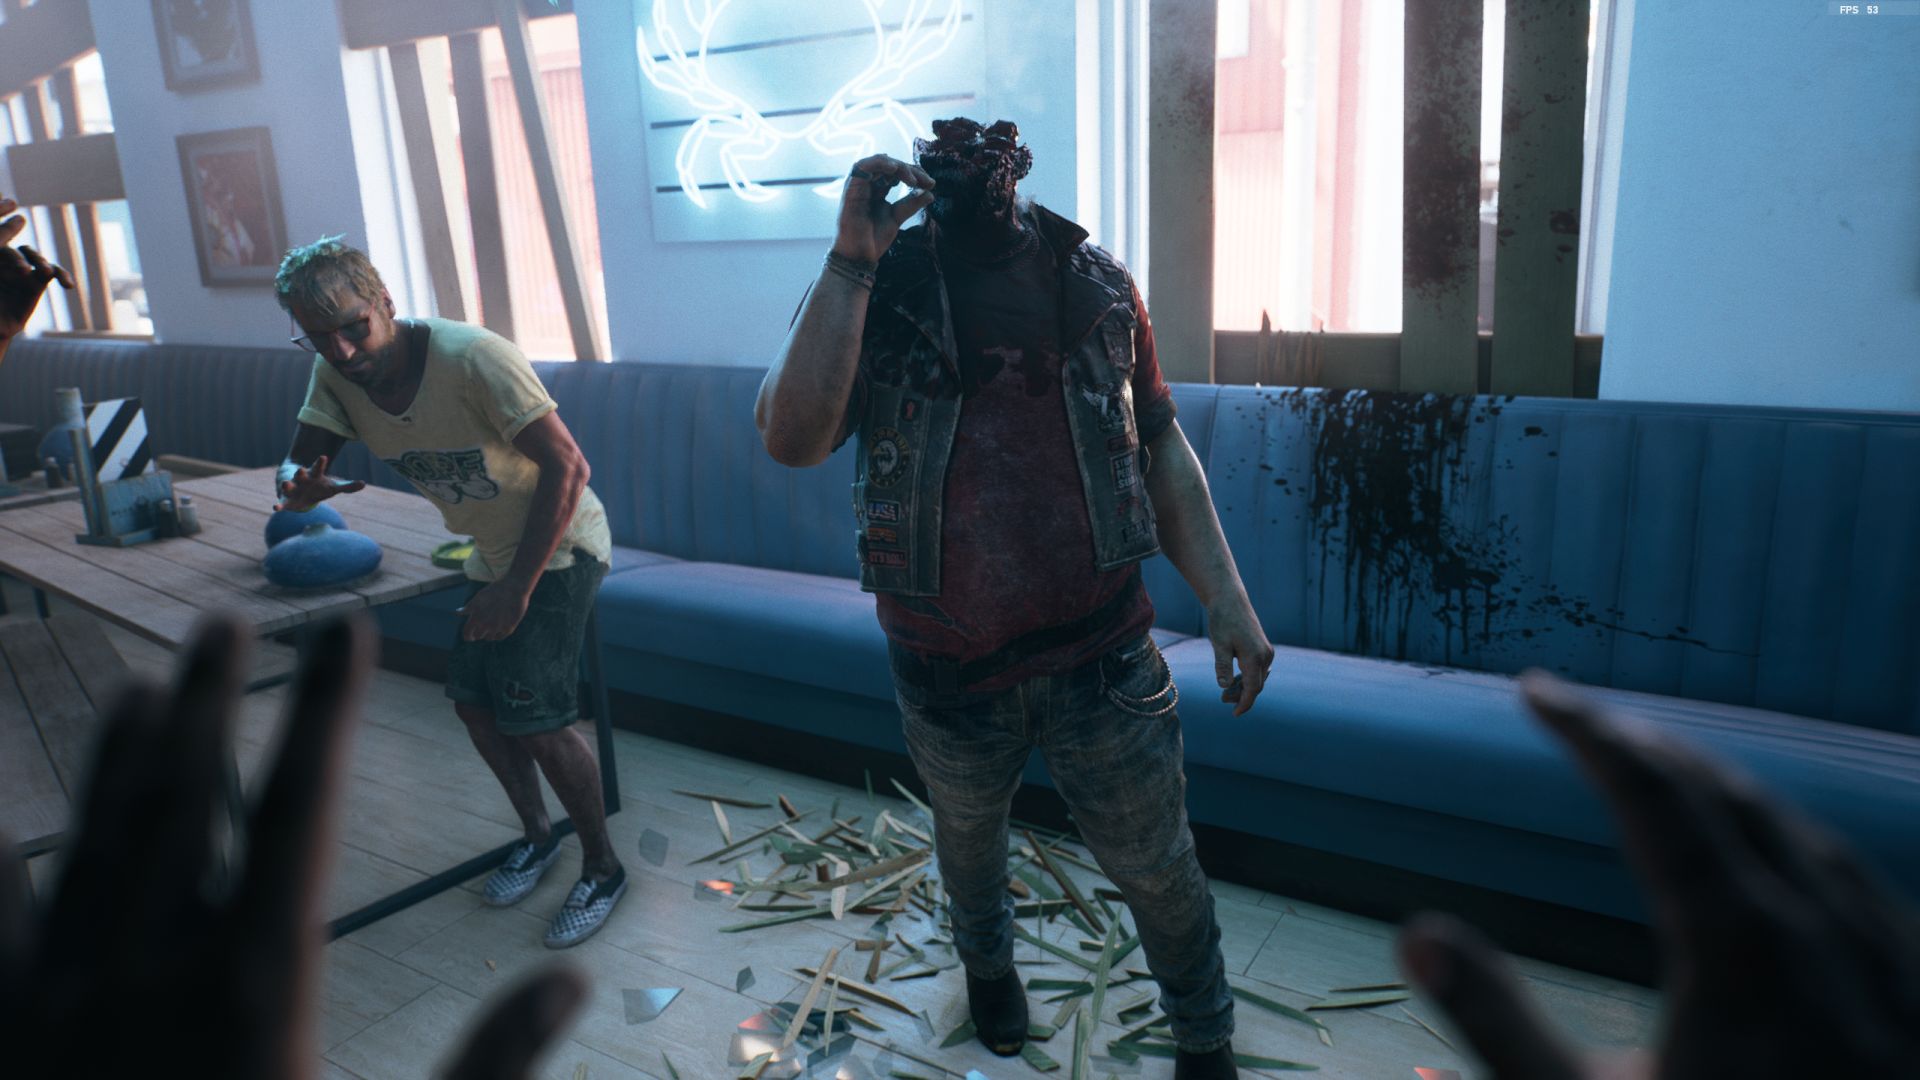 Review: Dead Island 2 – Welcome to HELL-A - XTgamer